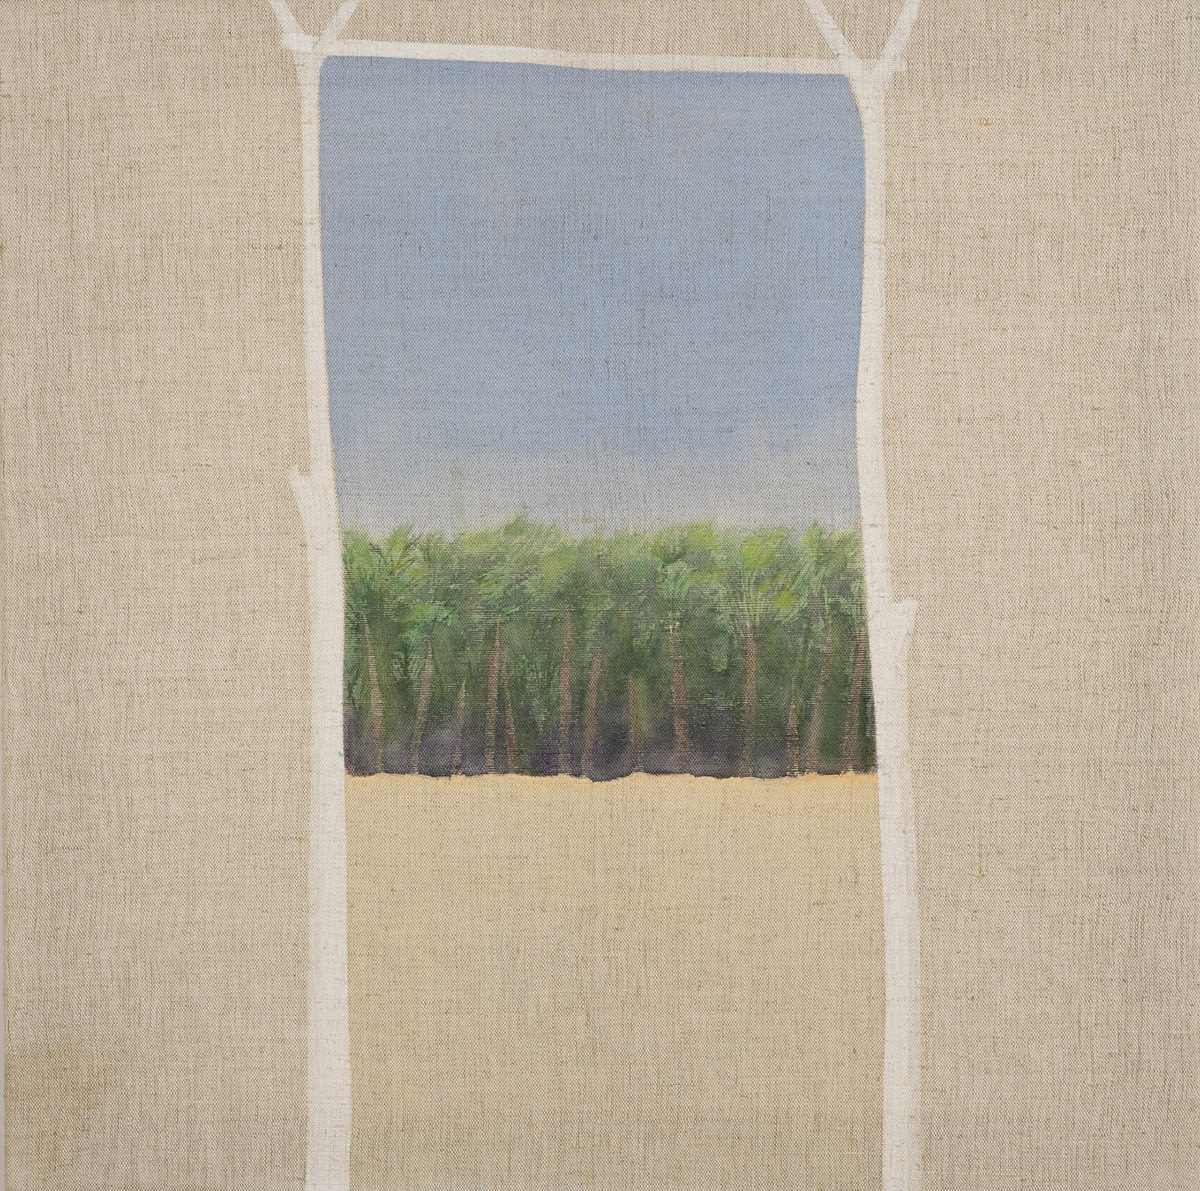 COCONUT GROVE, ZIPOLETE [SIC] 1987 by Patrick Scott HRHA (1921-2014) at Whyte's Auctions